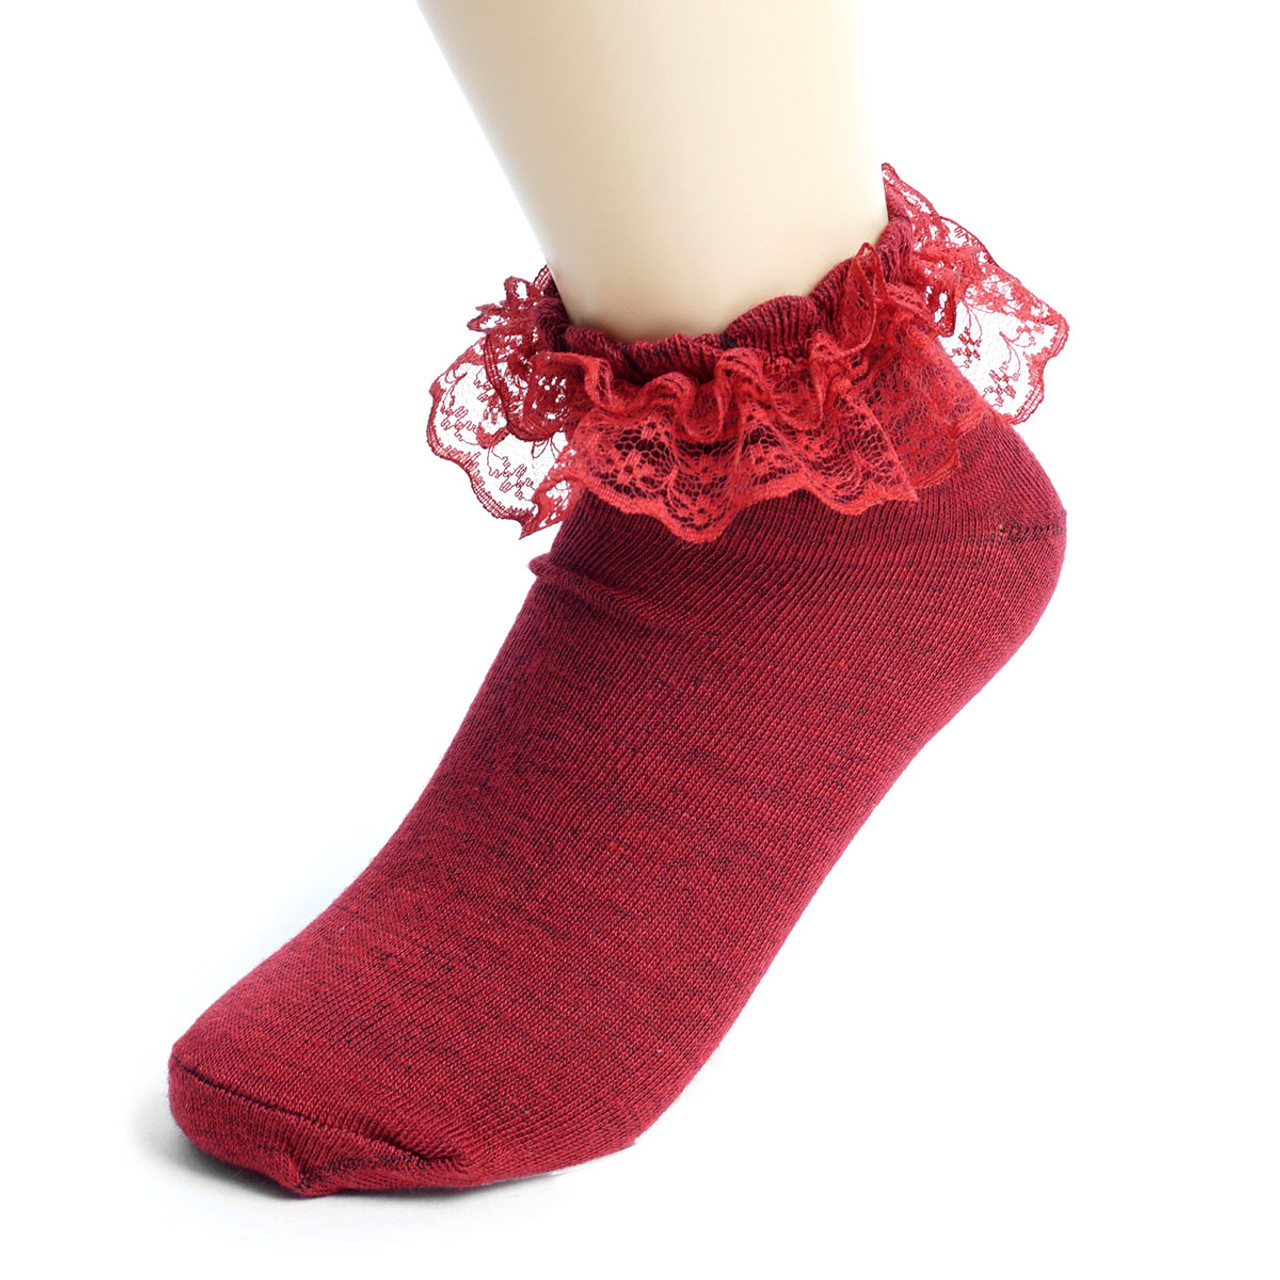 Leg Avenue Frilly Lace Ruffle Ankle Socks - Black White or Red